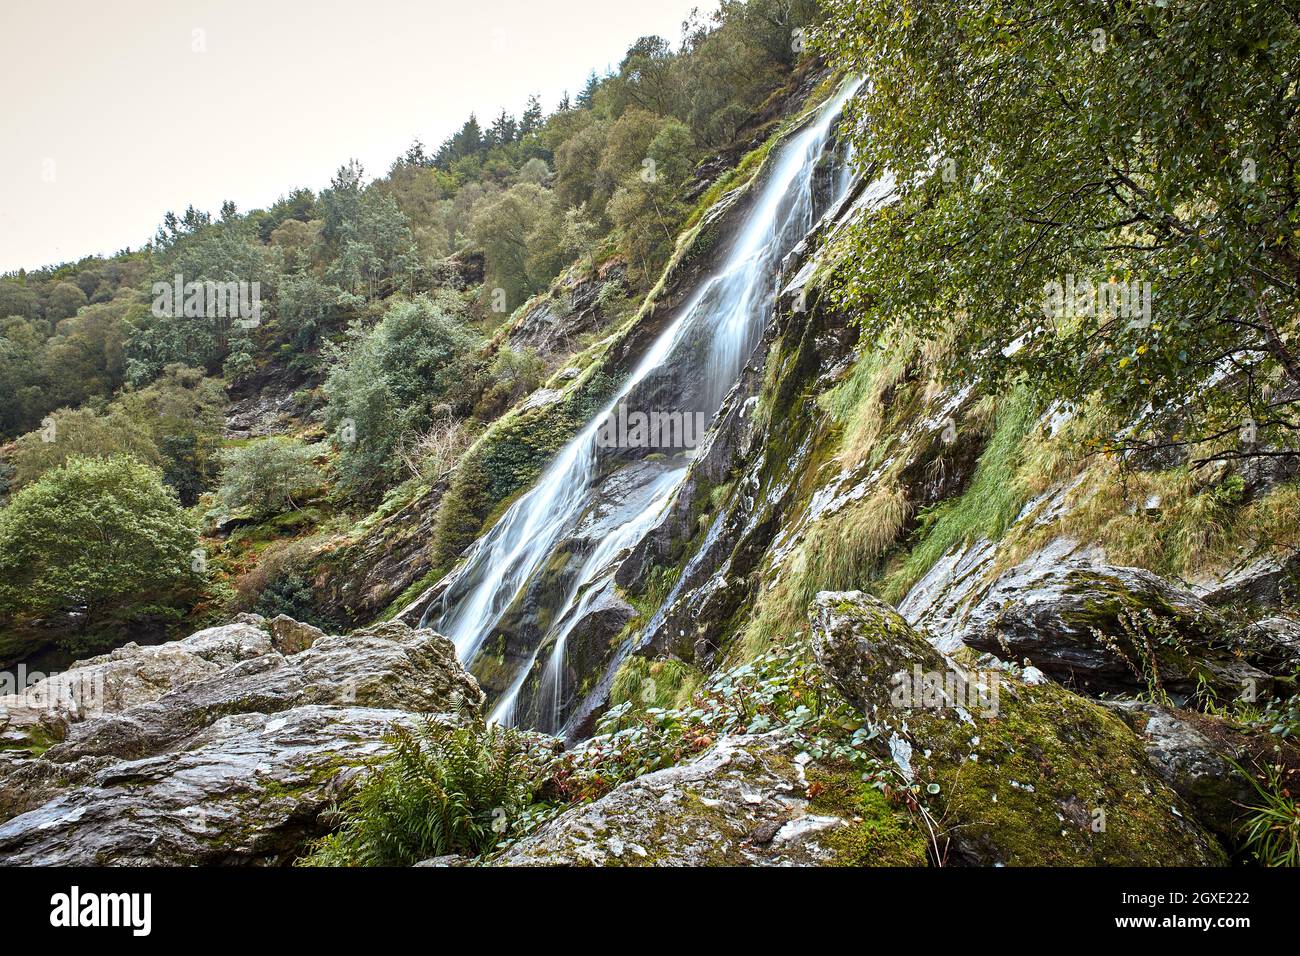 Majestic water cascade of Powerscourt Waterfall, the highest waterfall in Ireland. Famous tourist attractions in co. Wicklow, Ireland. Stock Photo